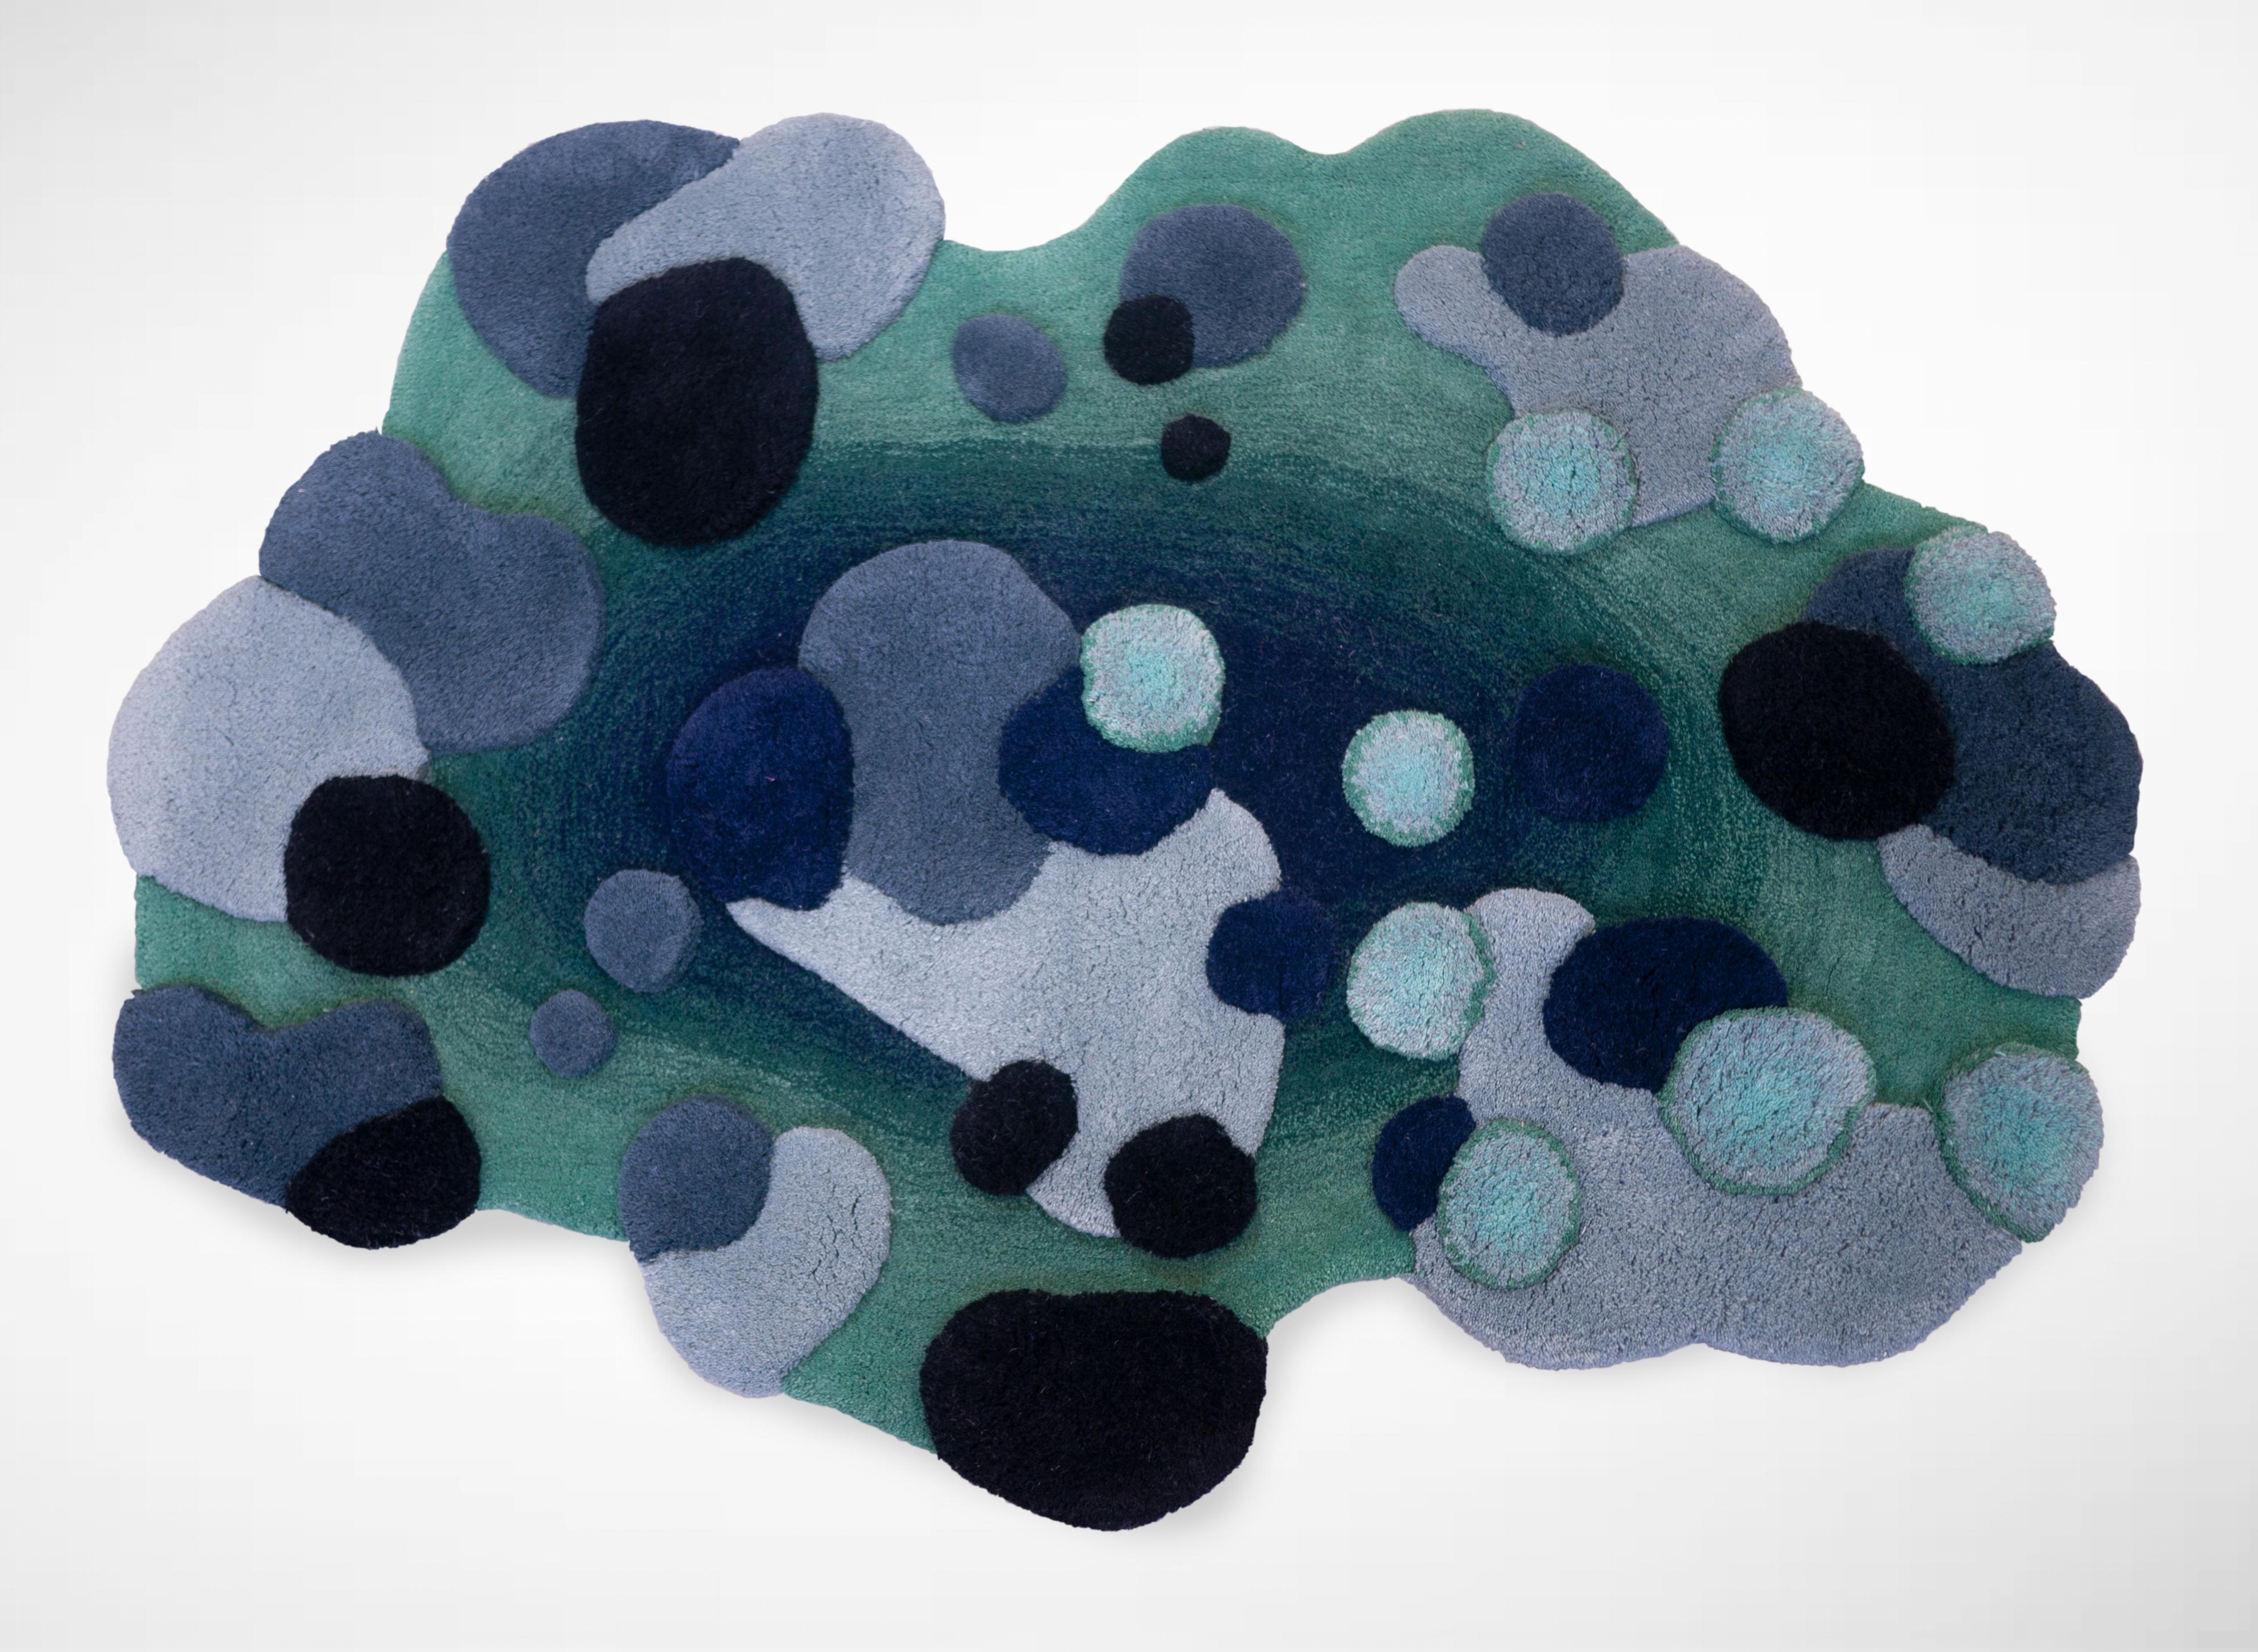 Midnight Grass is one out of a series of 5 rugs/tapestries specially made for Objects with Narratives.
Fuzzy Friends are physical representations of the soft spots in our mind, places we retraet to when we need to recharge. Tactile moments of